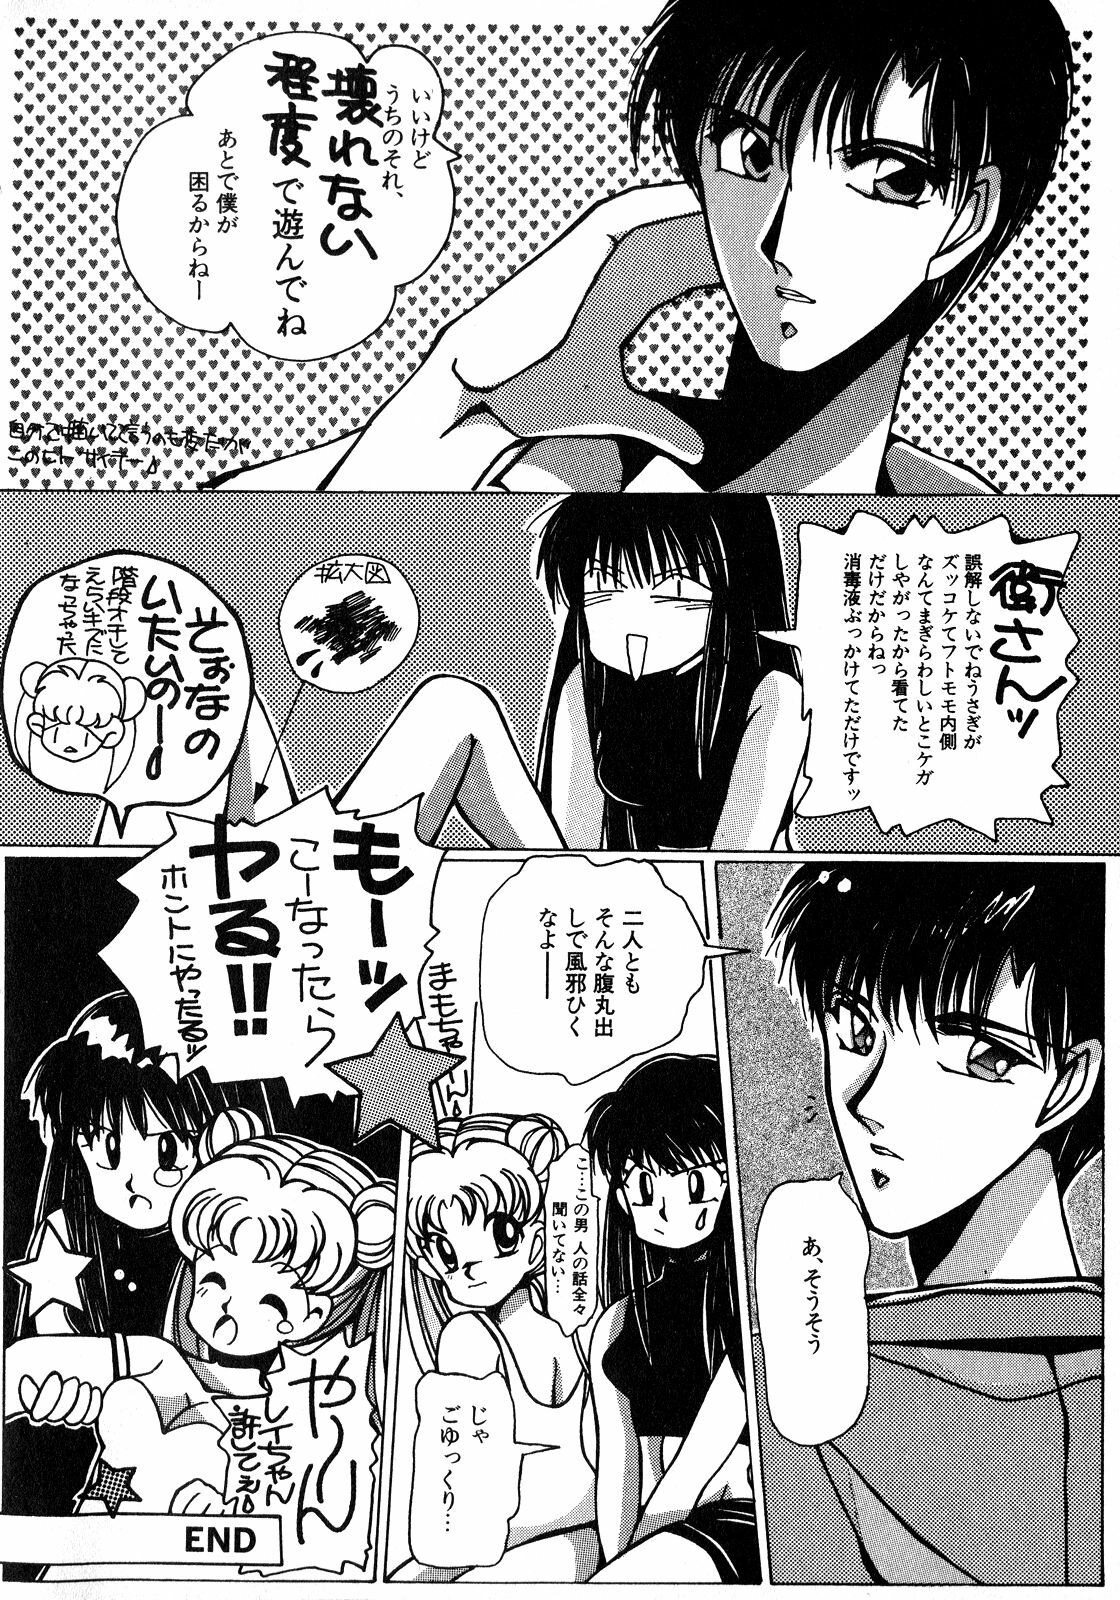 [Anthology] Lunatic Party 8 (Sailor Moon) page 45 full